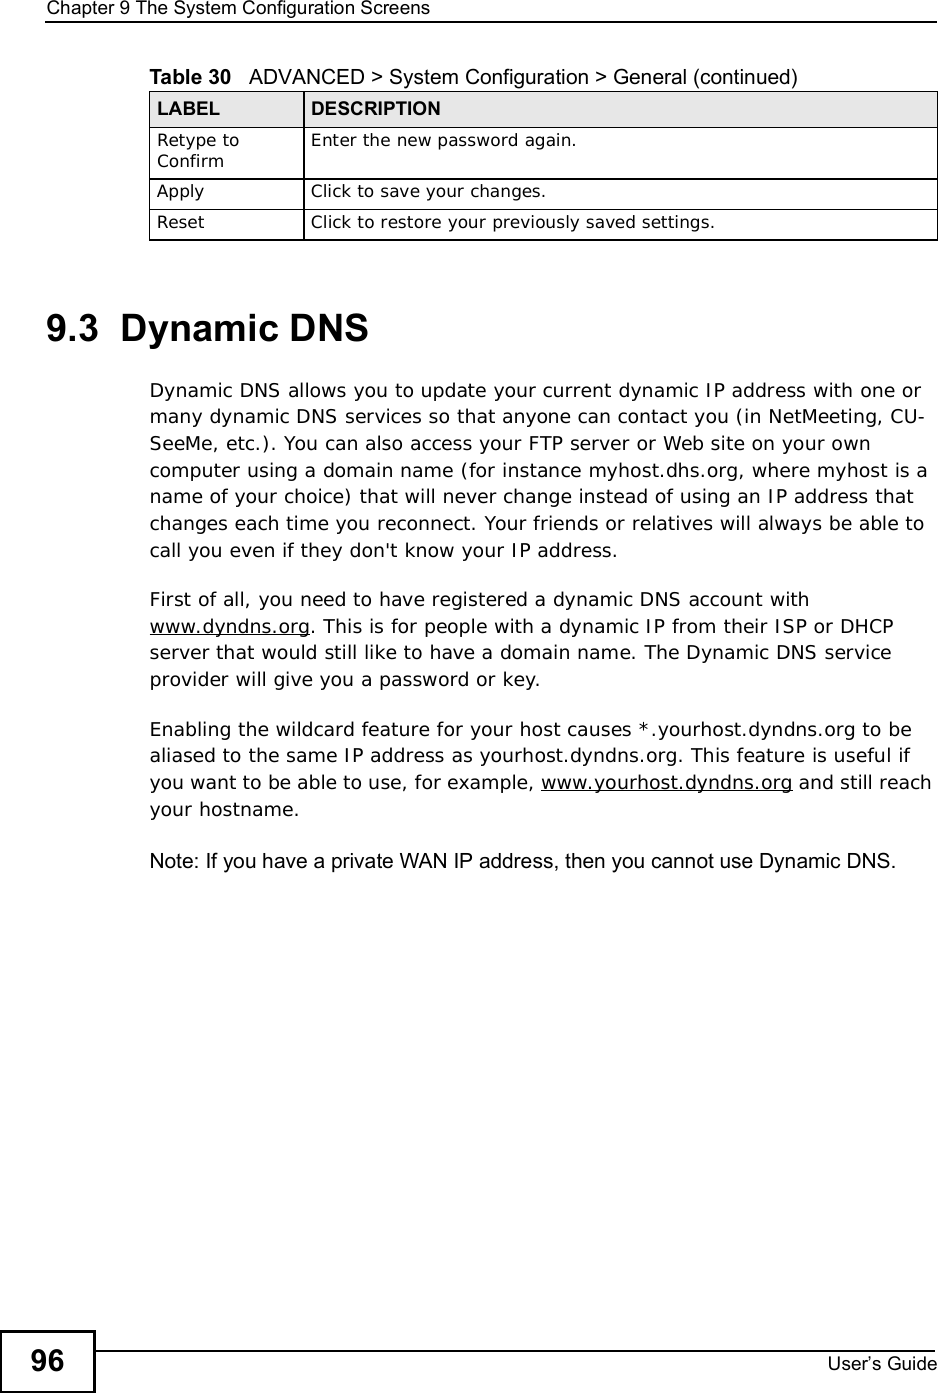 Chapter 9The System Configuration ScreensUser s Guide969.3  Dynamic DNSDynamic DNS allows you to update your current dynamic IP address with one or many dynamic DNS services so that anyone can contact you (in NetMeeting, CU-SeeMe, etc.). You can also access your FTP server or Web site on your own computer using a domain name (for instance myhost.dhs.org, where myhost is a name of your choice) that will never change instead of using an IP address that changes each time you reconnect. Your friends or relatives will always be able to call you even if they don&apos;t know your IP address.First of all, you need to have registered a dynamic DNS account with www.dyndns.org. This is for people with a dynamic IP from their ISP or DHCP server that would still like to have a domain name. The Dynamic DNS service provider will give you a password or key.Enabling the wildcard feature for your host causes *.yourhost.dyndns.org to be aliased to the same IP address as yourhost.dyndns.org. This feature is useful if you want to be able to use, for example, www.yourhost.dyndns.org and still reach your hostname.Note: If you have a private WAN IP address, then you cannot use Dynamic DNS.Retype to Confirm Enter the new password again.ApplyClick to save your changes.ResetClick to restore your previously saved settings.Table 30   ADVANCED &gt; System Configuration &gt; General (continued)LABEL DESCRIPTION